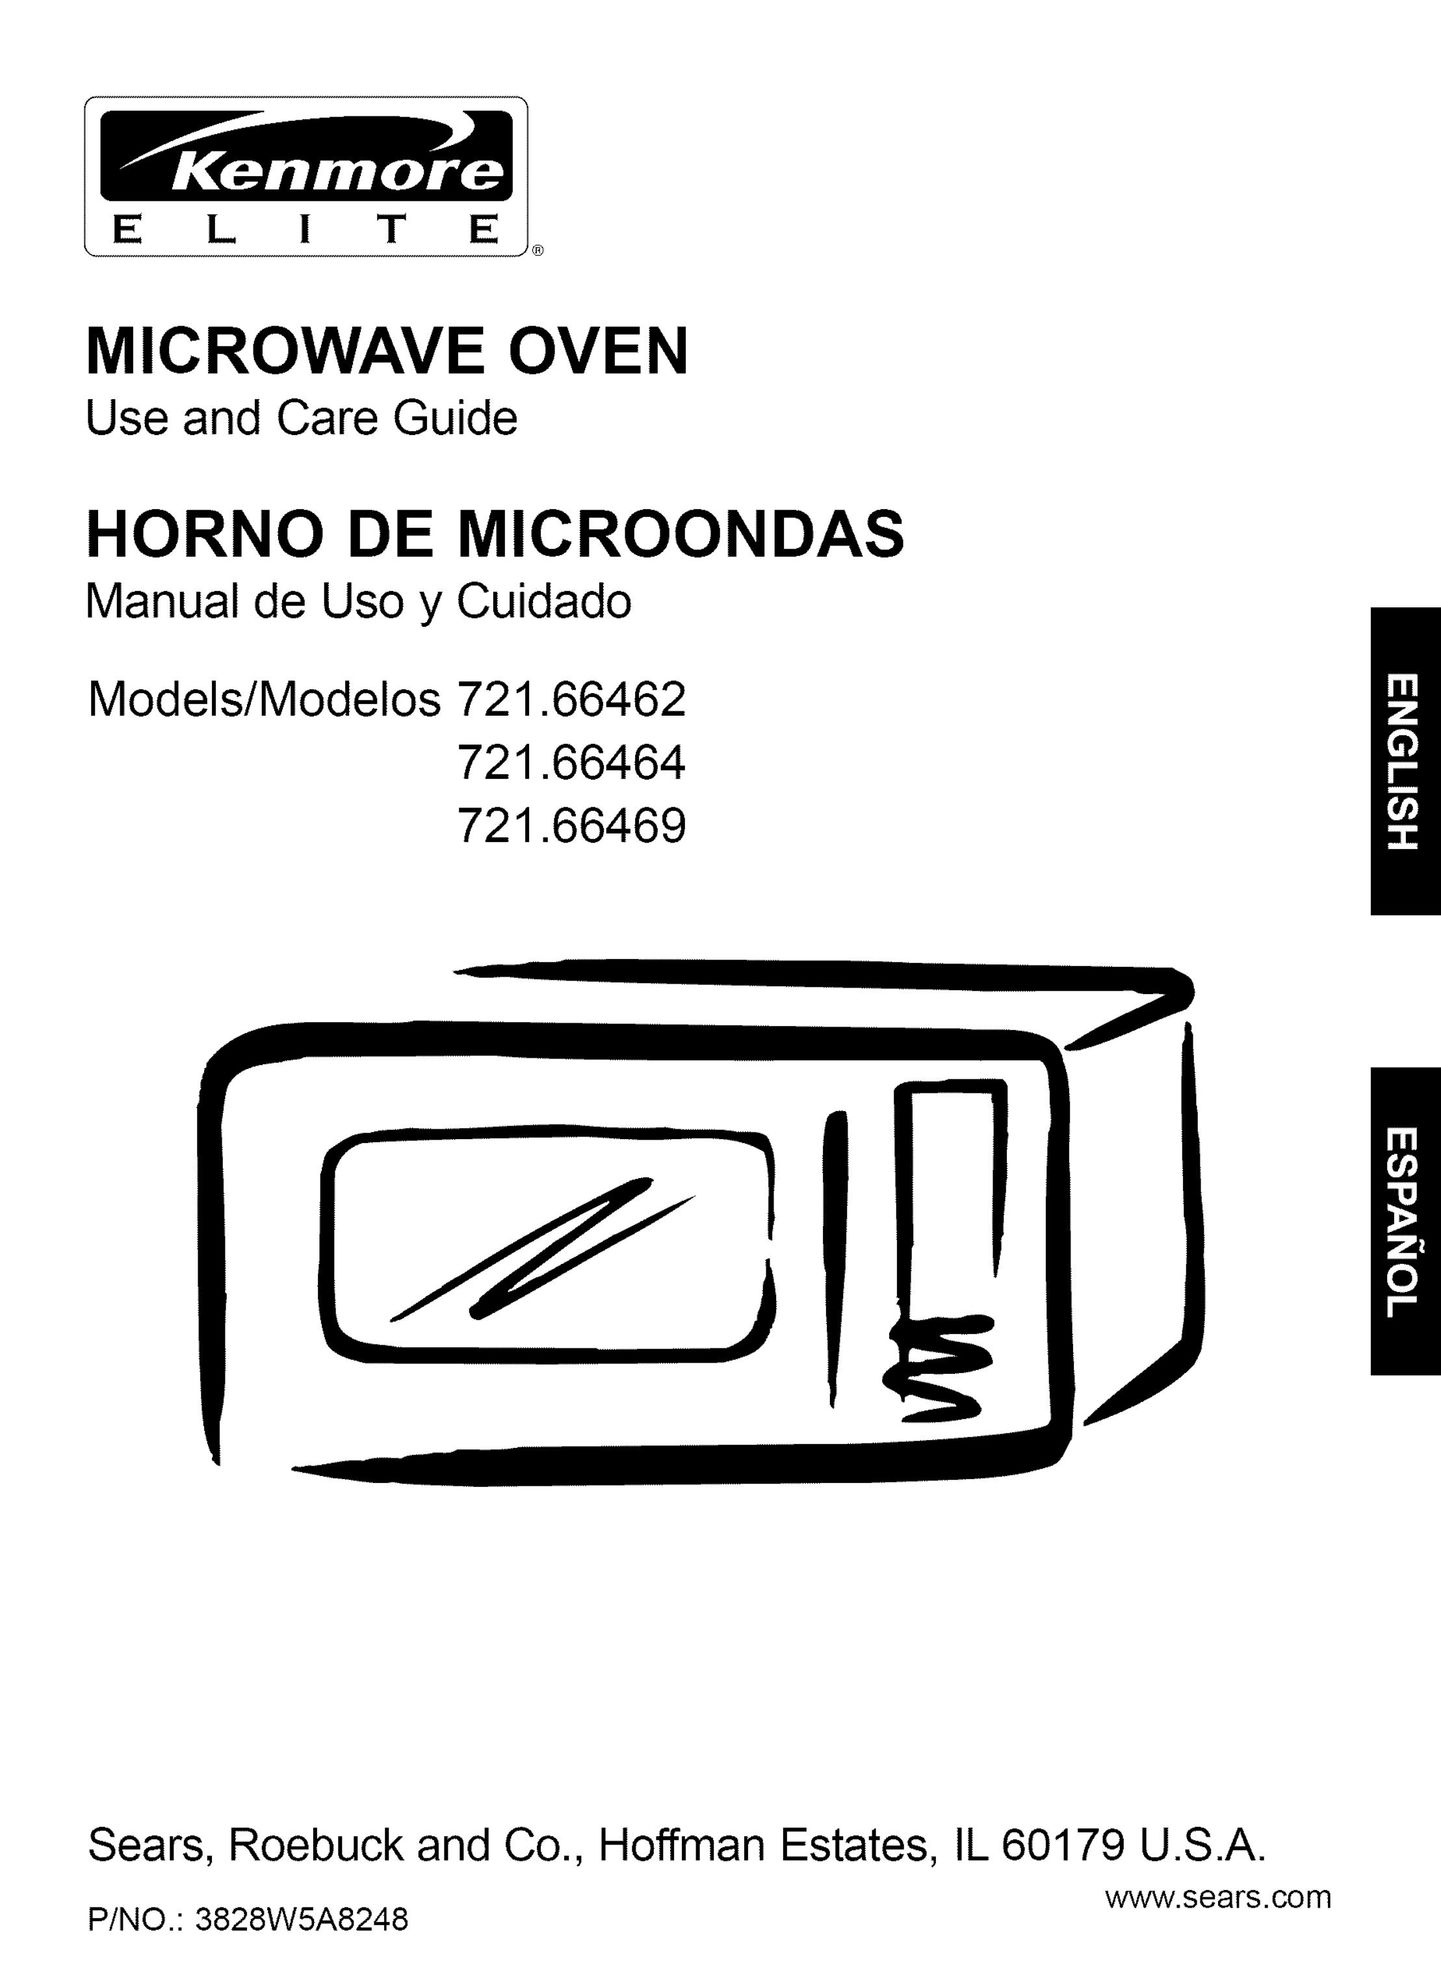 Kenmore 721.66469 Microwave Oven User Manual